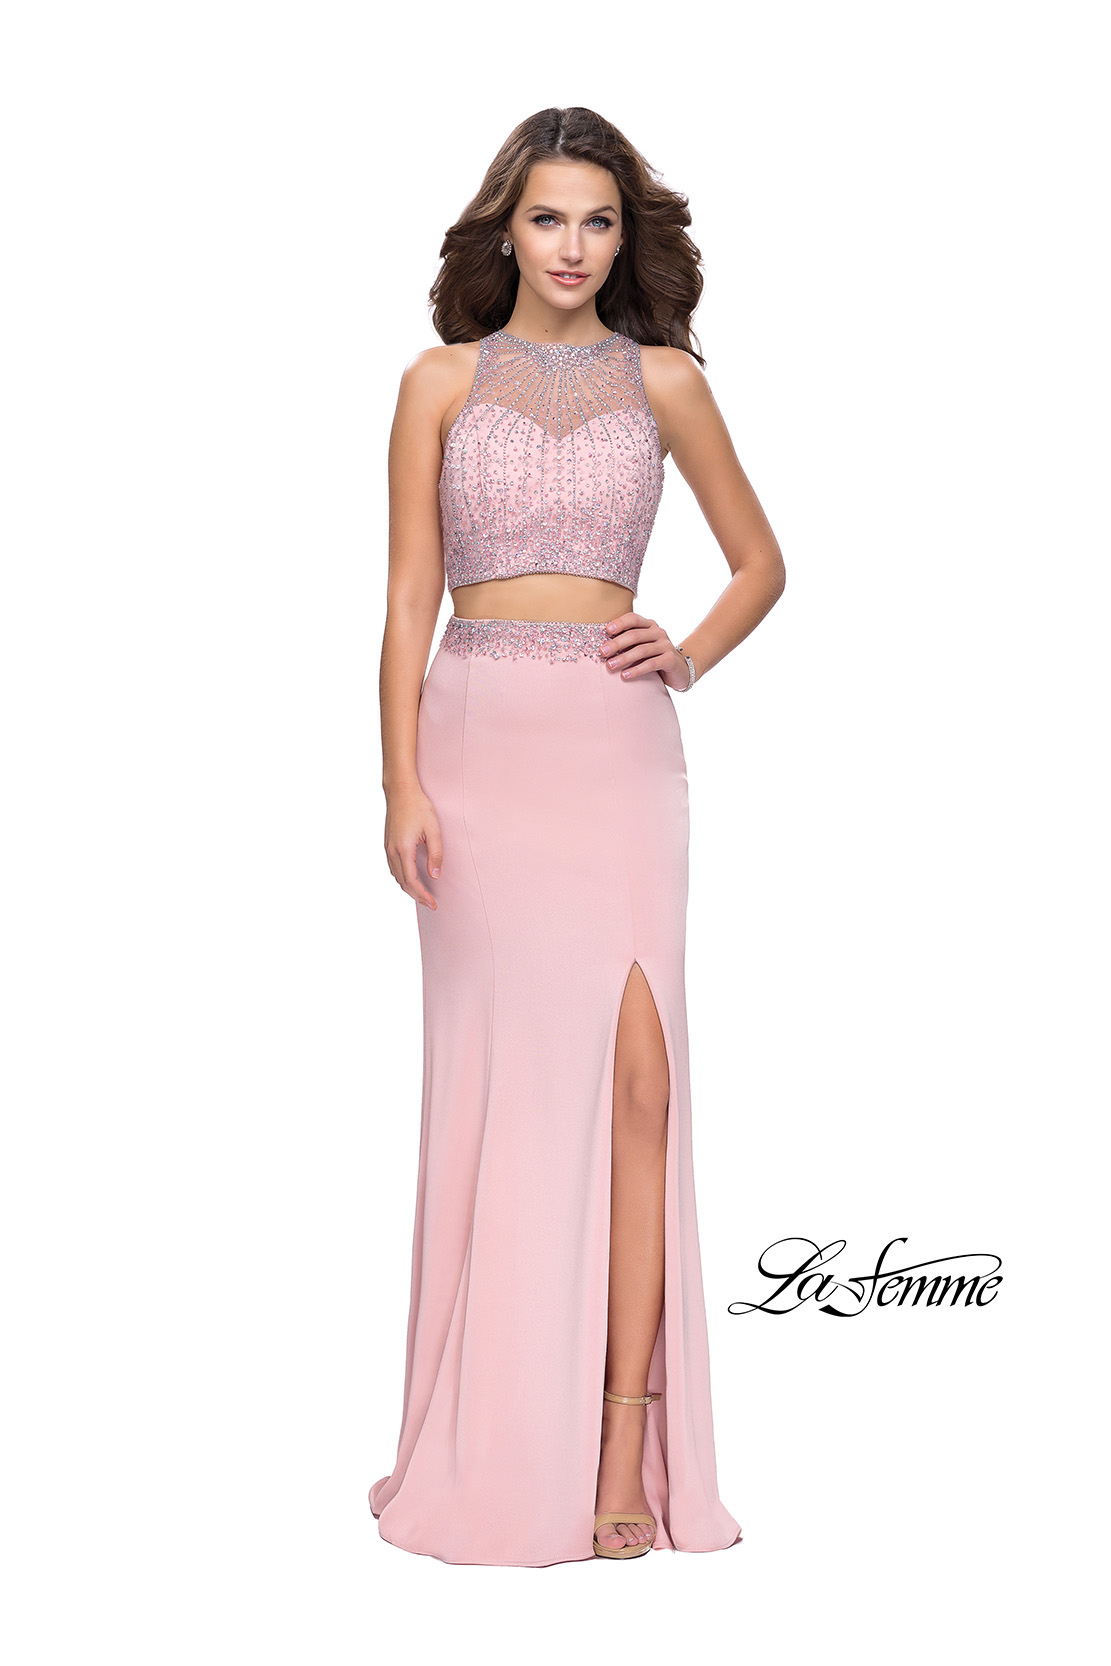 Two Piece Blush Prom Dress with Beaded Top by La Femme